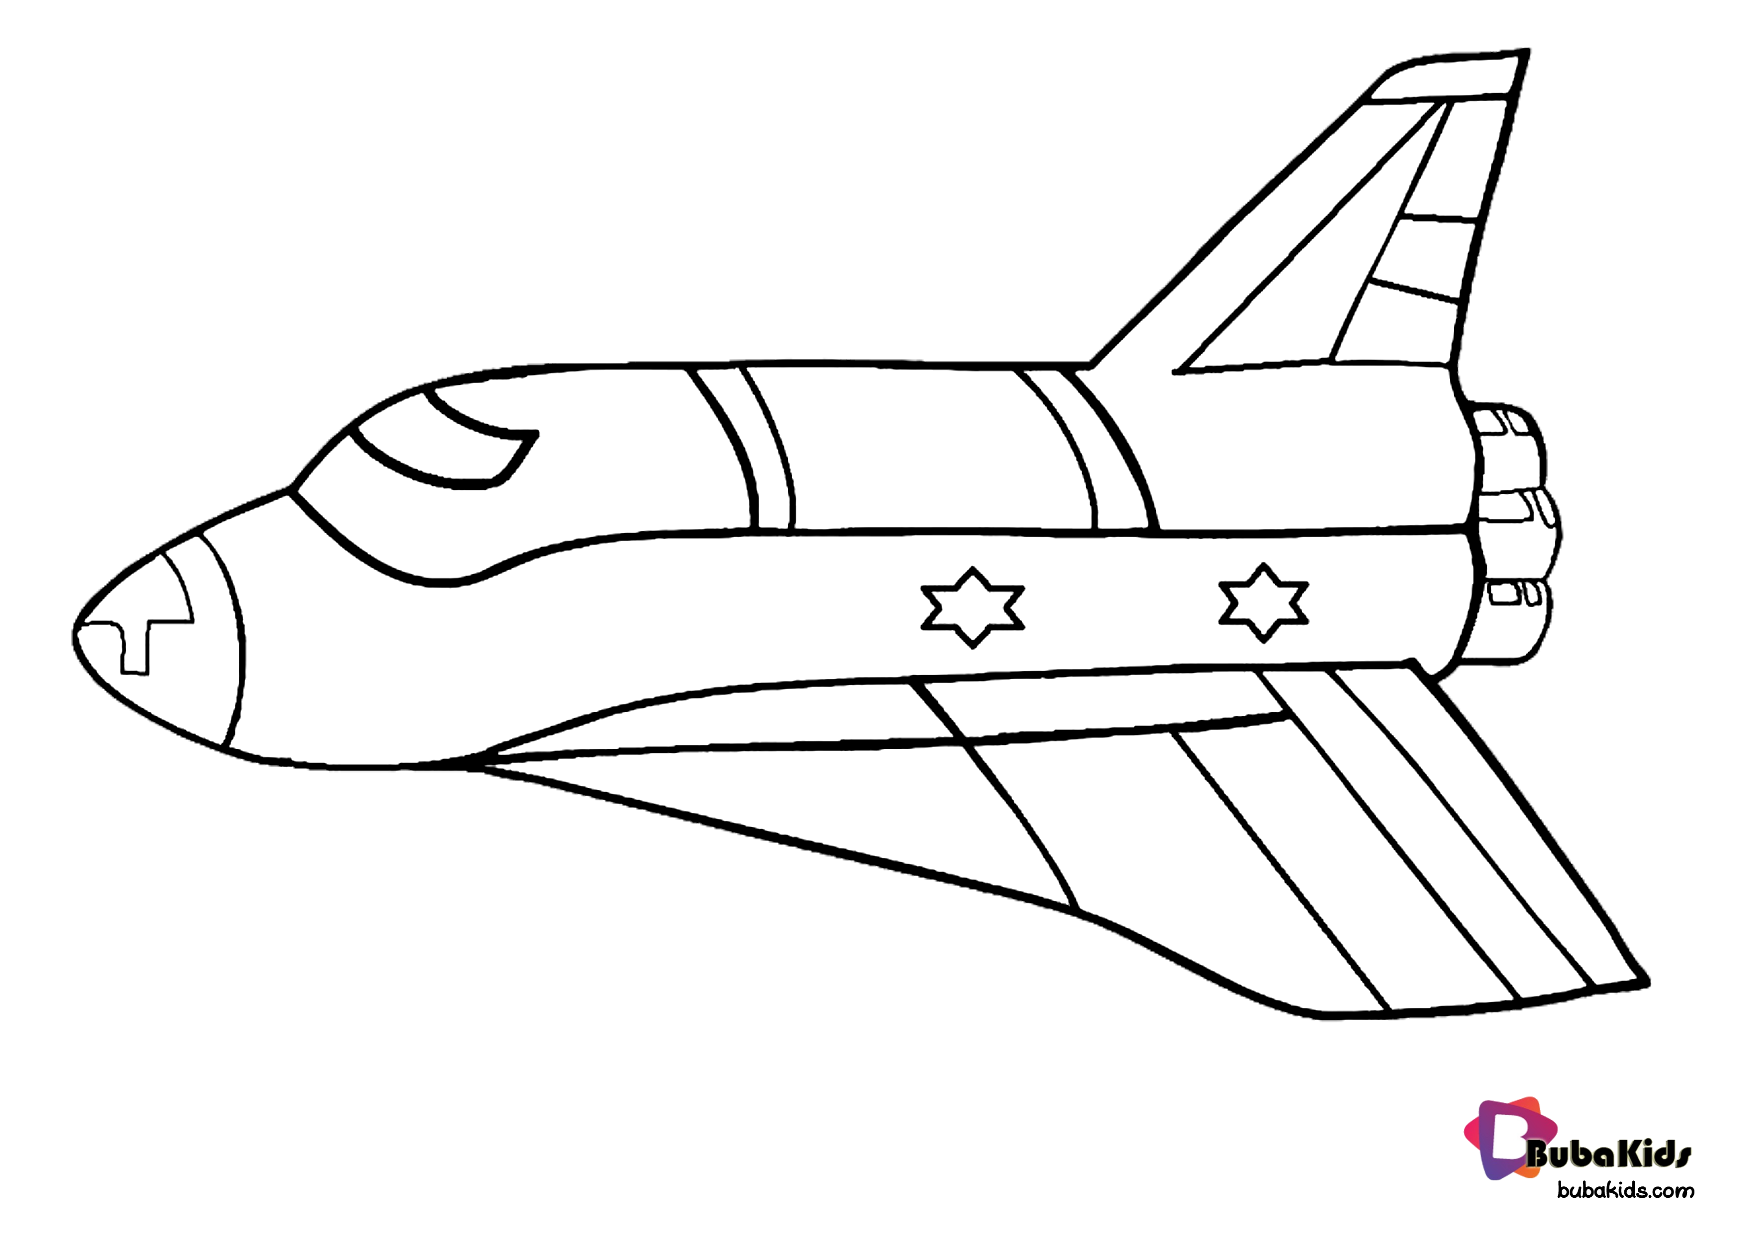 Space ship free download and printable coloring page Wallpaper